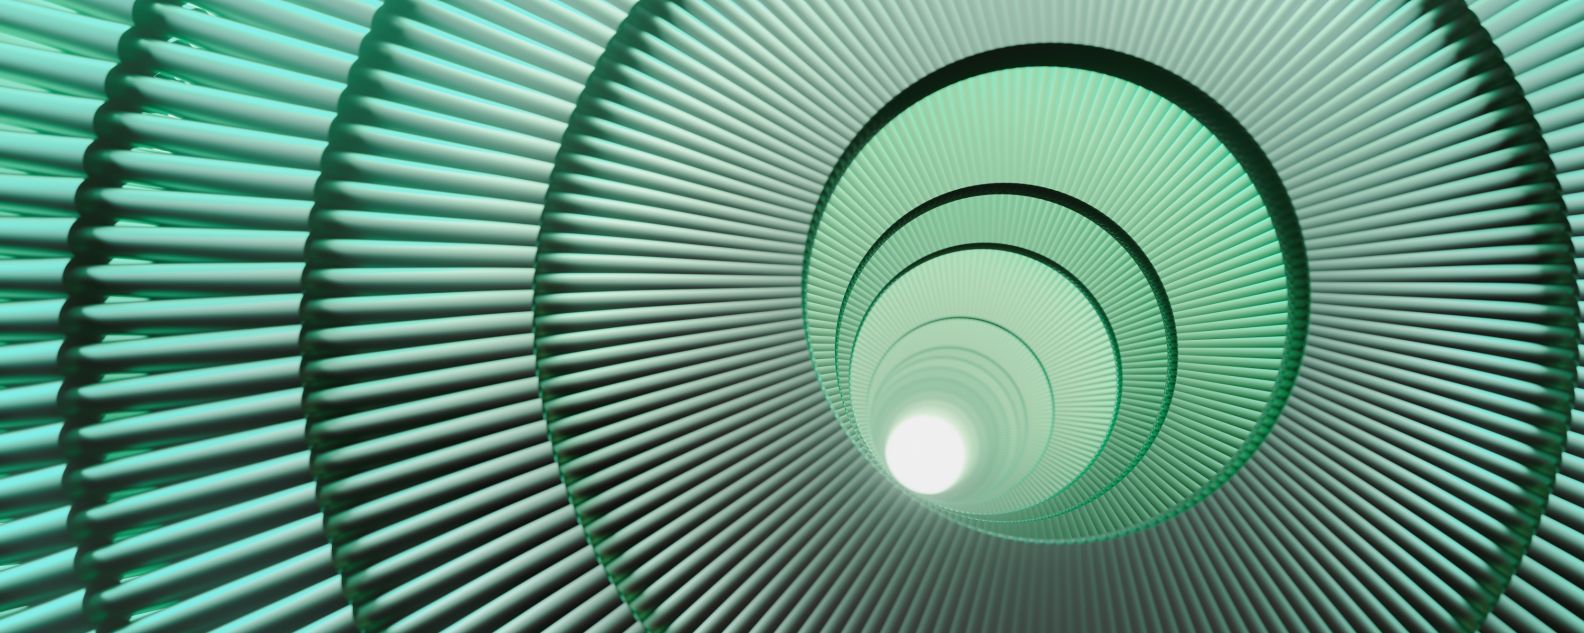 abstract illustration of green spirals